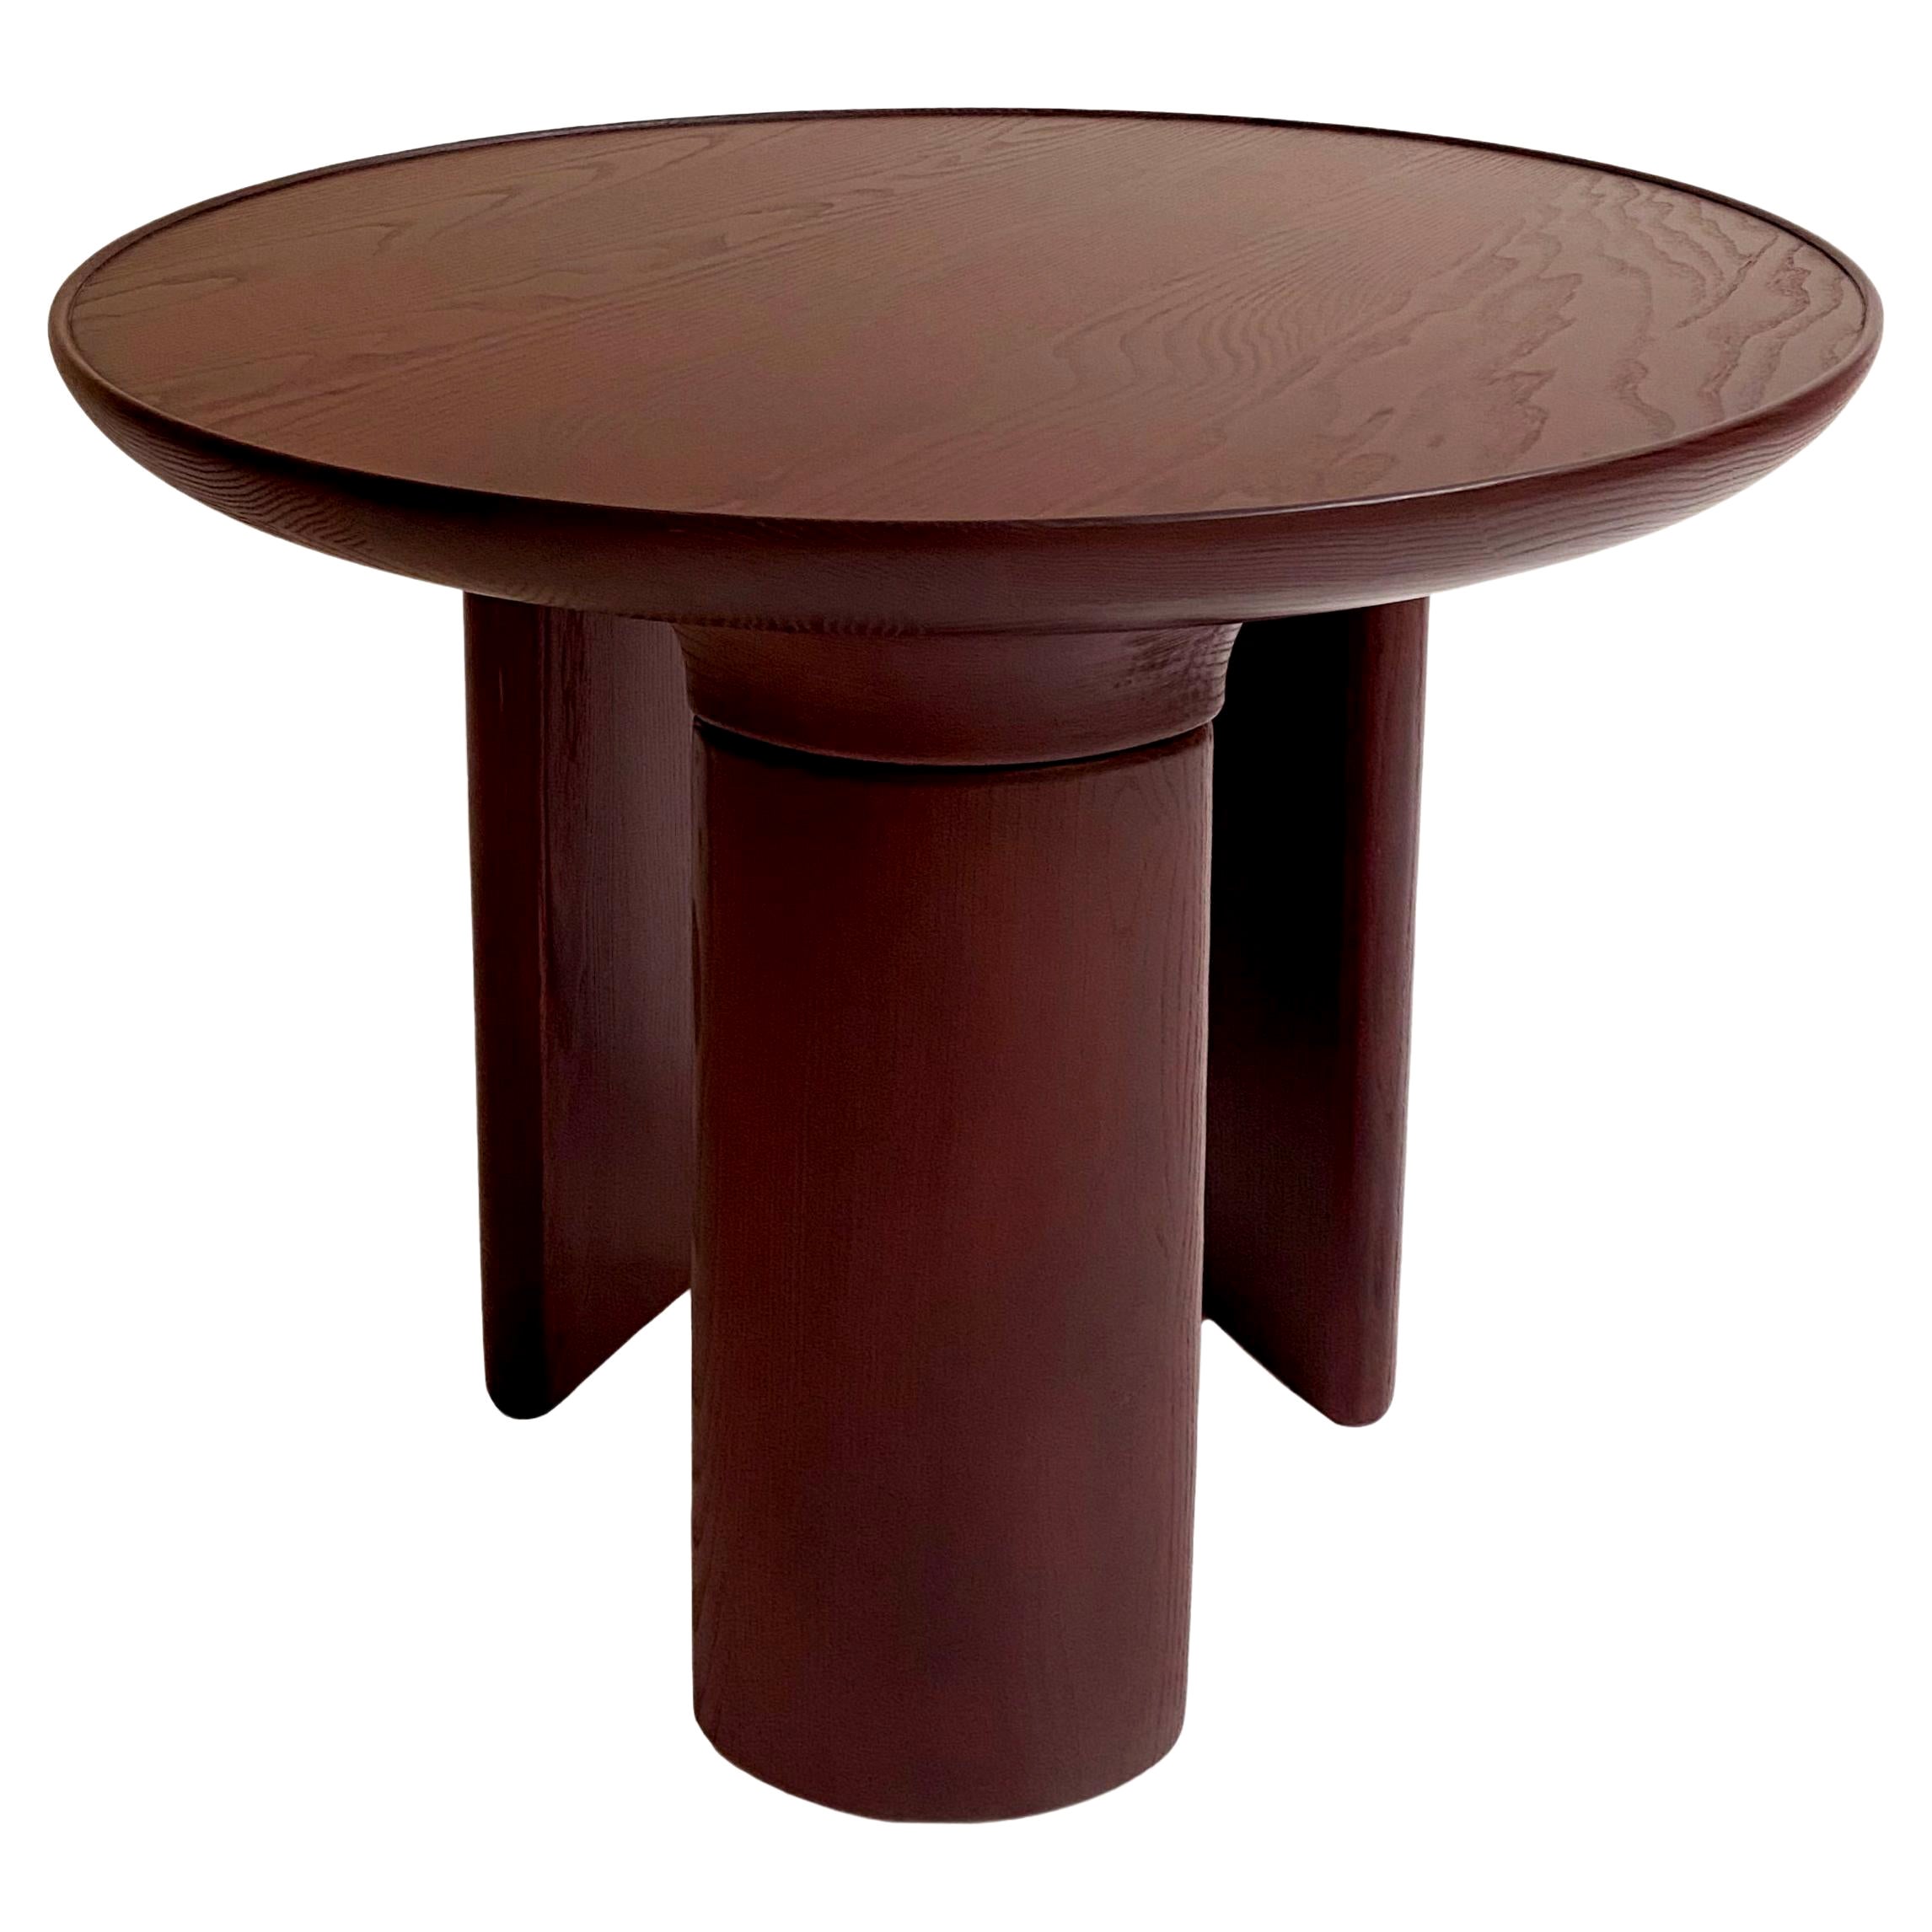 Black Grape Stained Daiku Coffee Table by Victoria Magniant For Sale